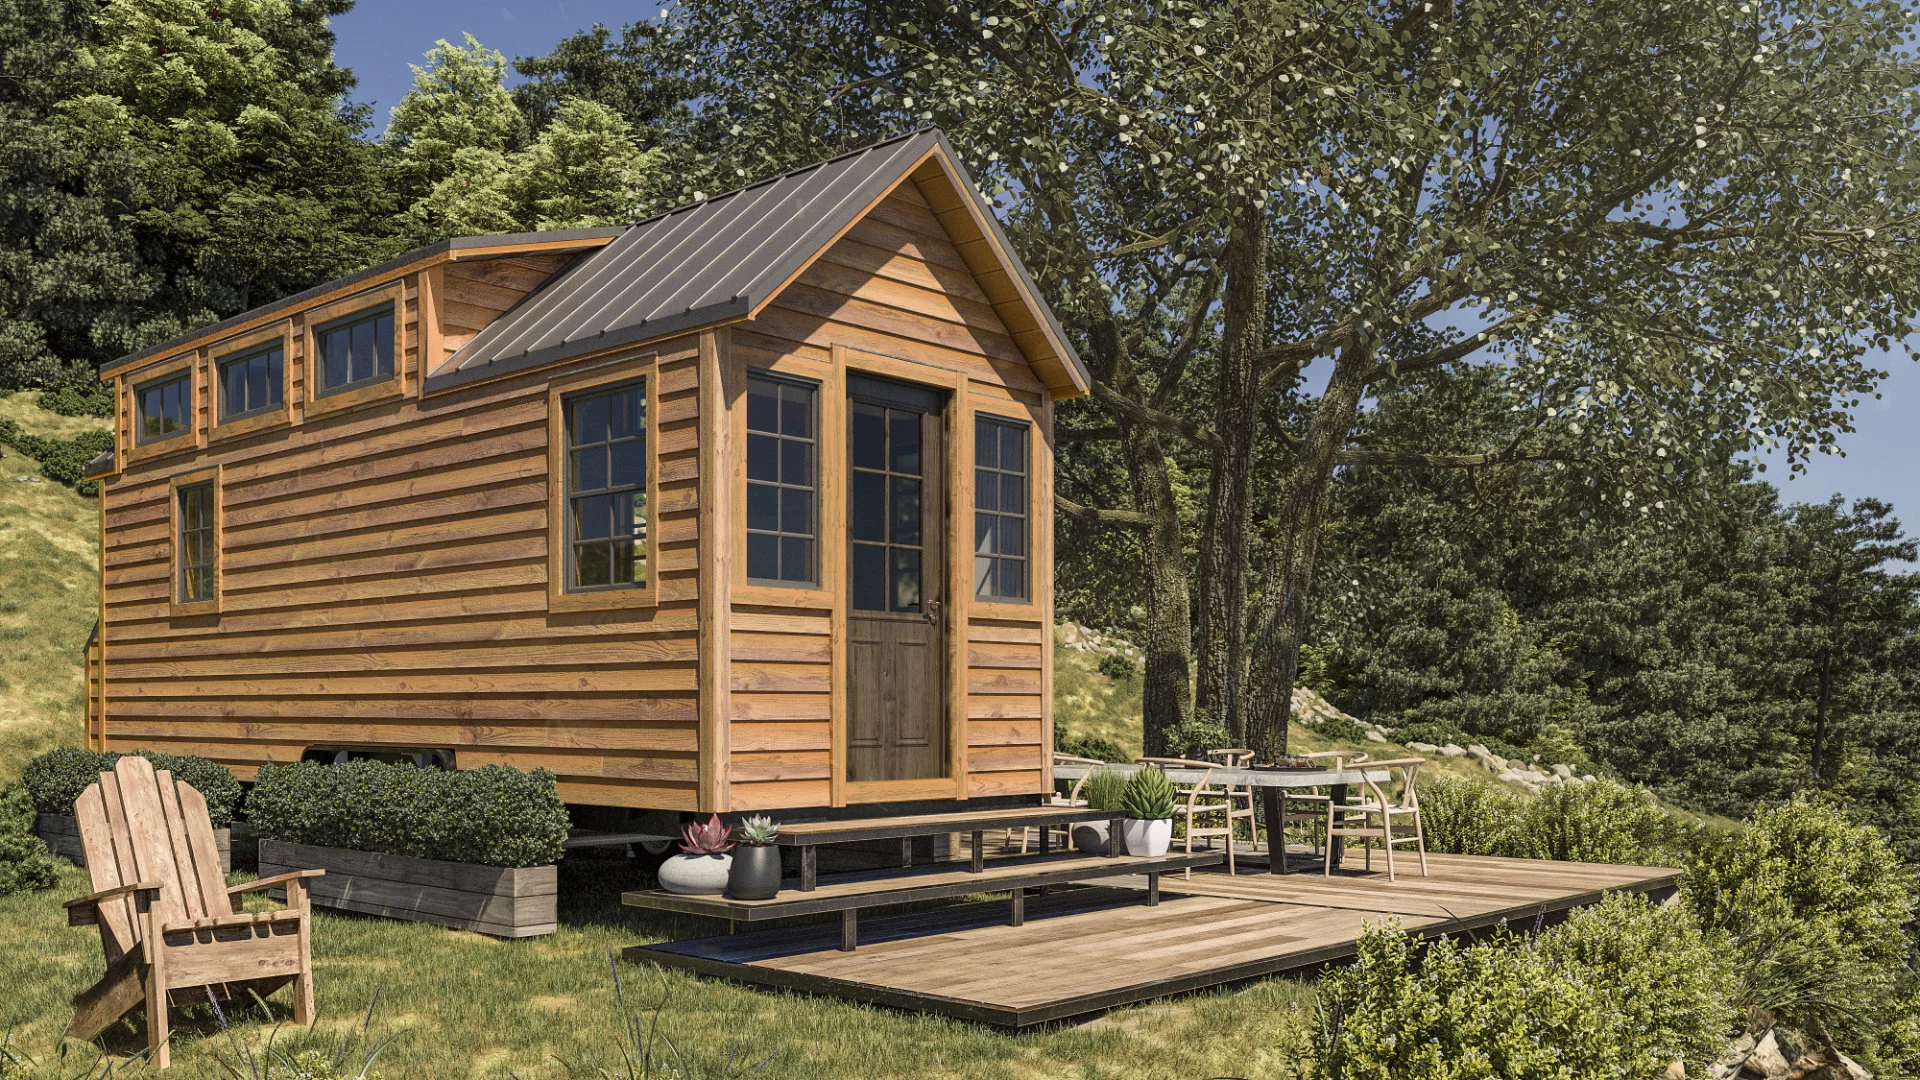 https://www.tinyhomebuilders.com/images/products/tiny-living/tiny-living-tiny-house-exterior-1.webp